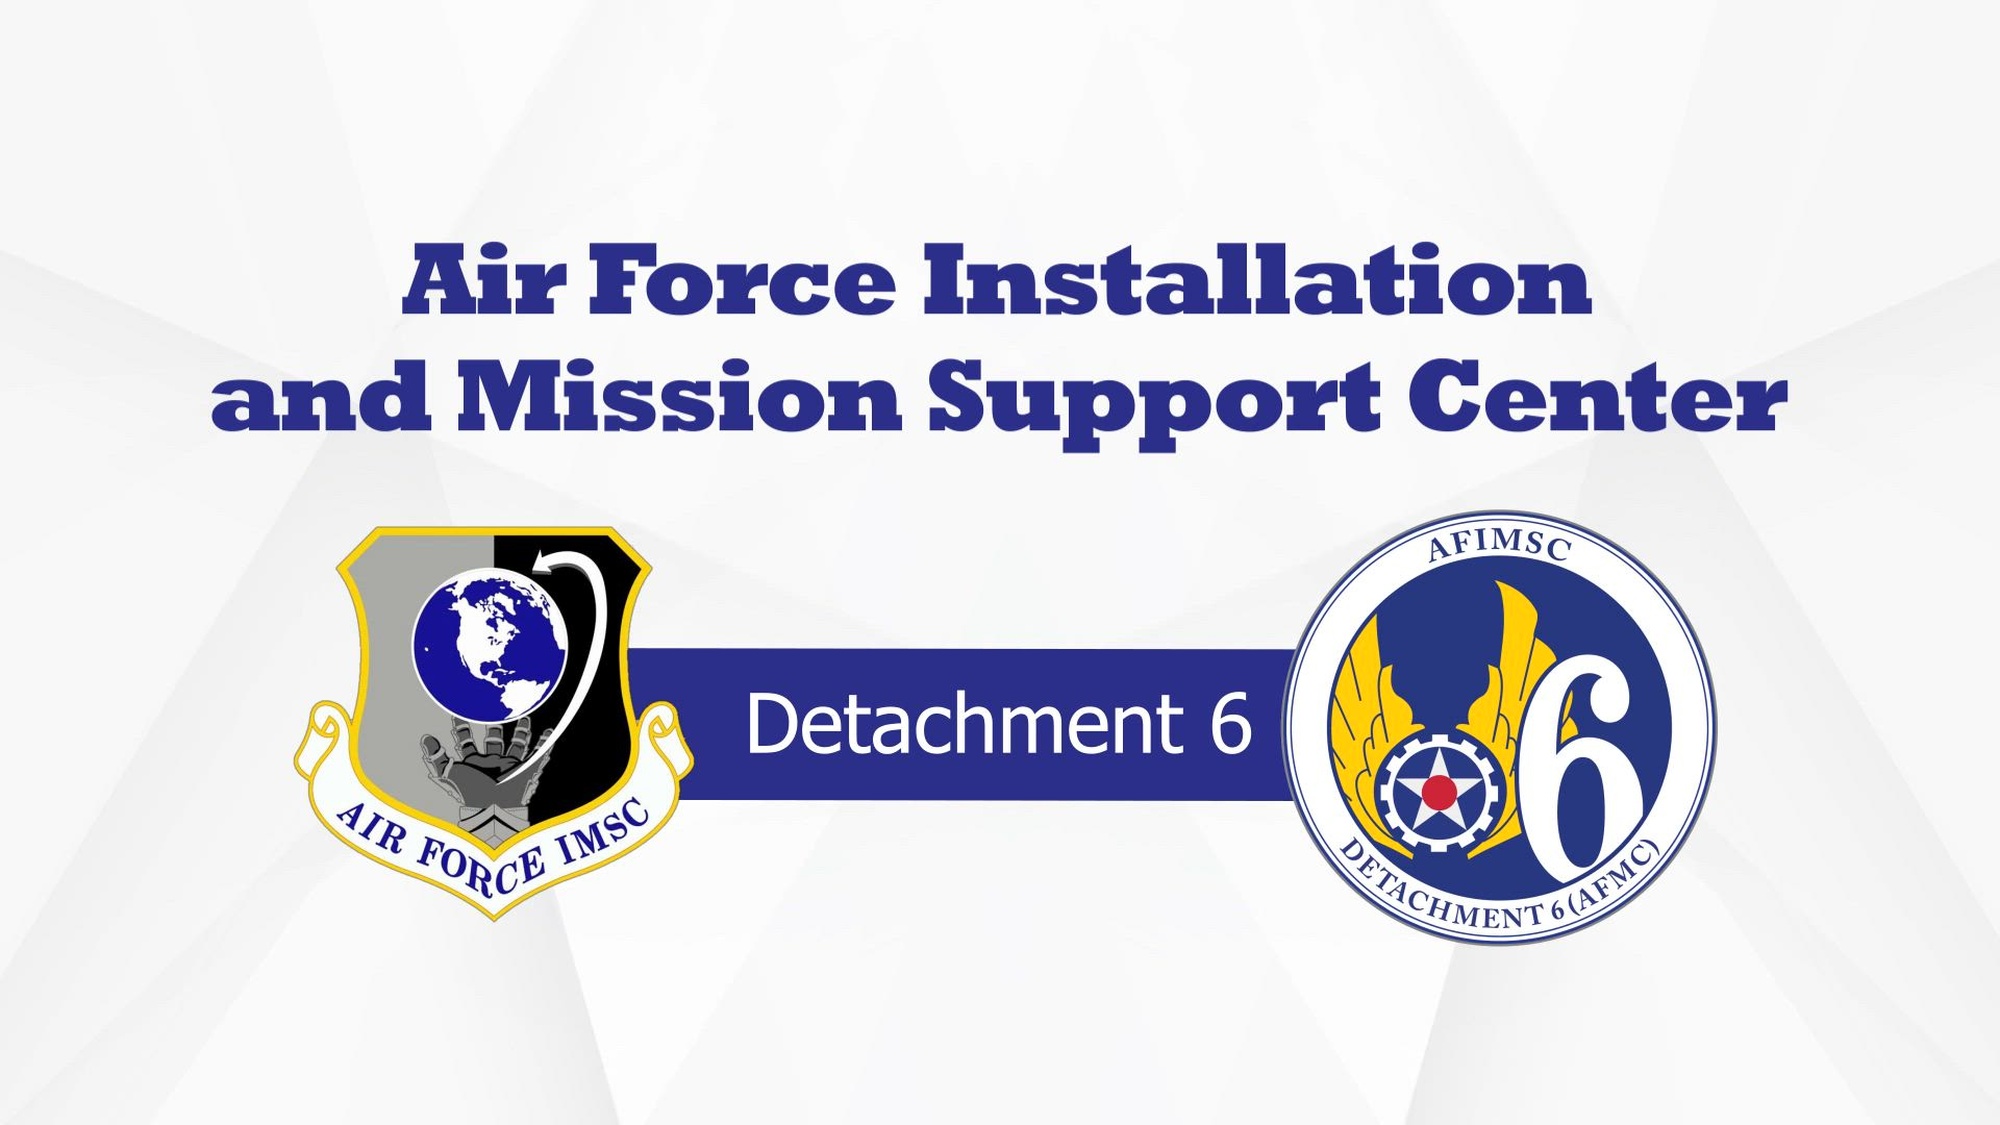 Air Force Installation and Mission Support Center Detachment 6 provides quality installations, emergency services and financial management oversight required to enable Air Force Materiel Command to support and sustain expeditionary capabilities to warfighters across the globe.